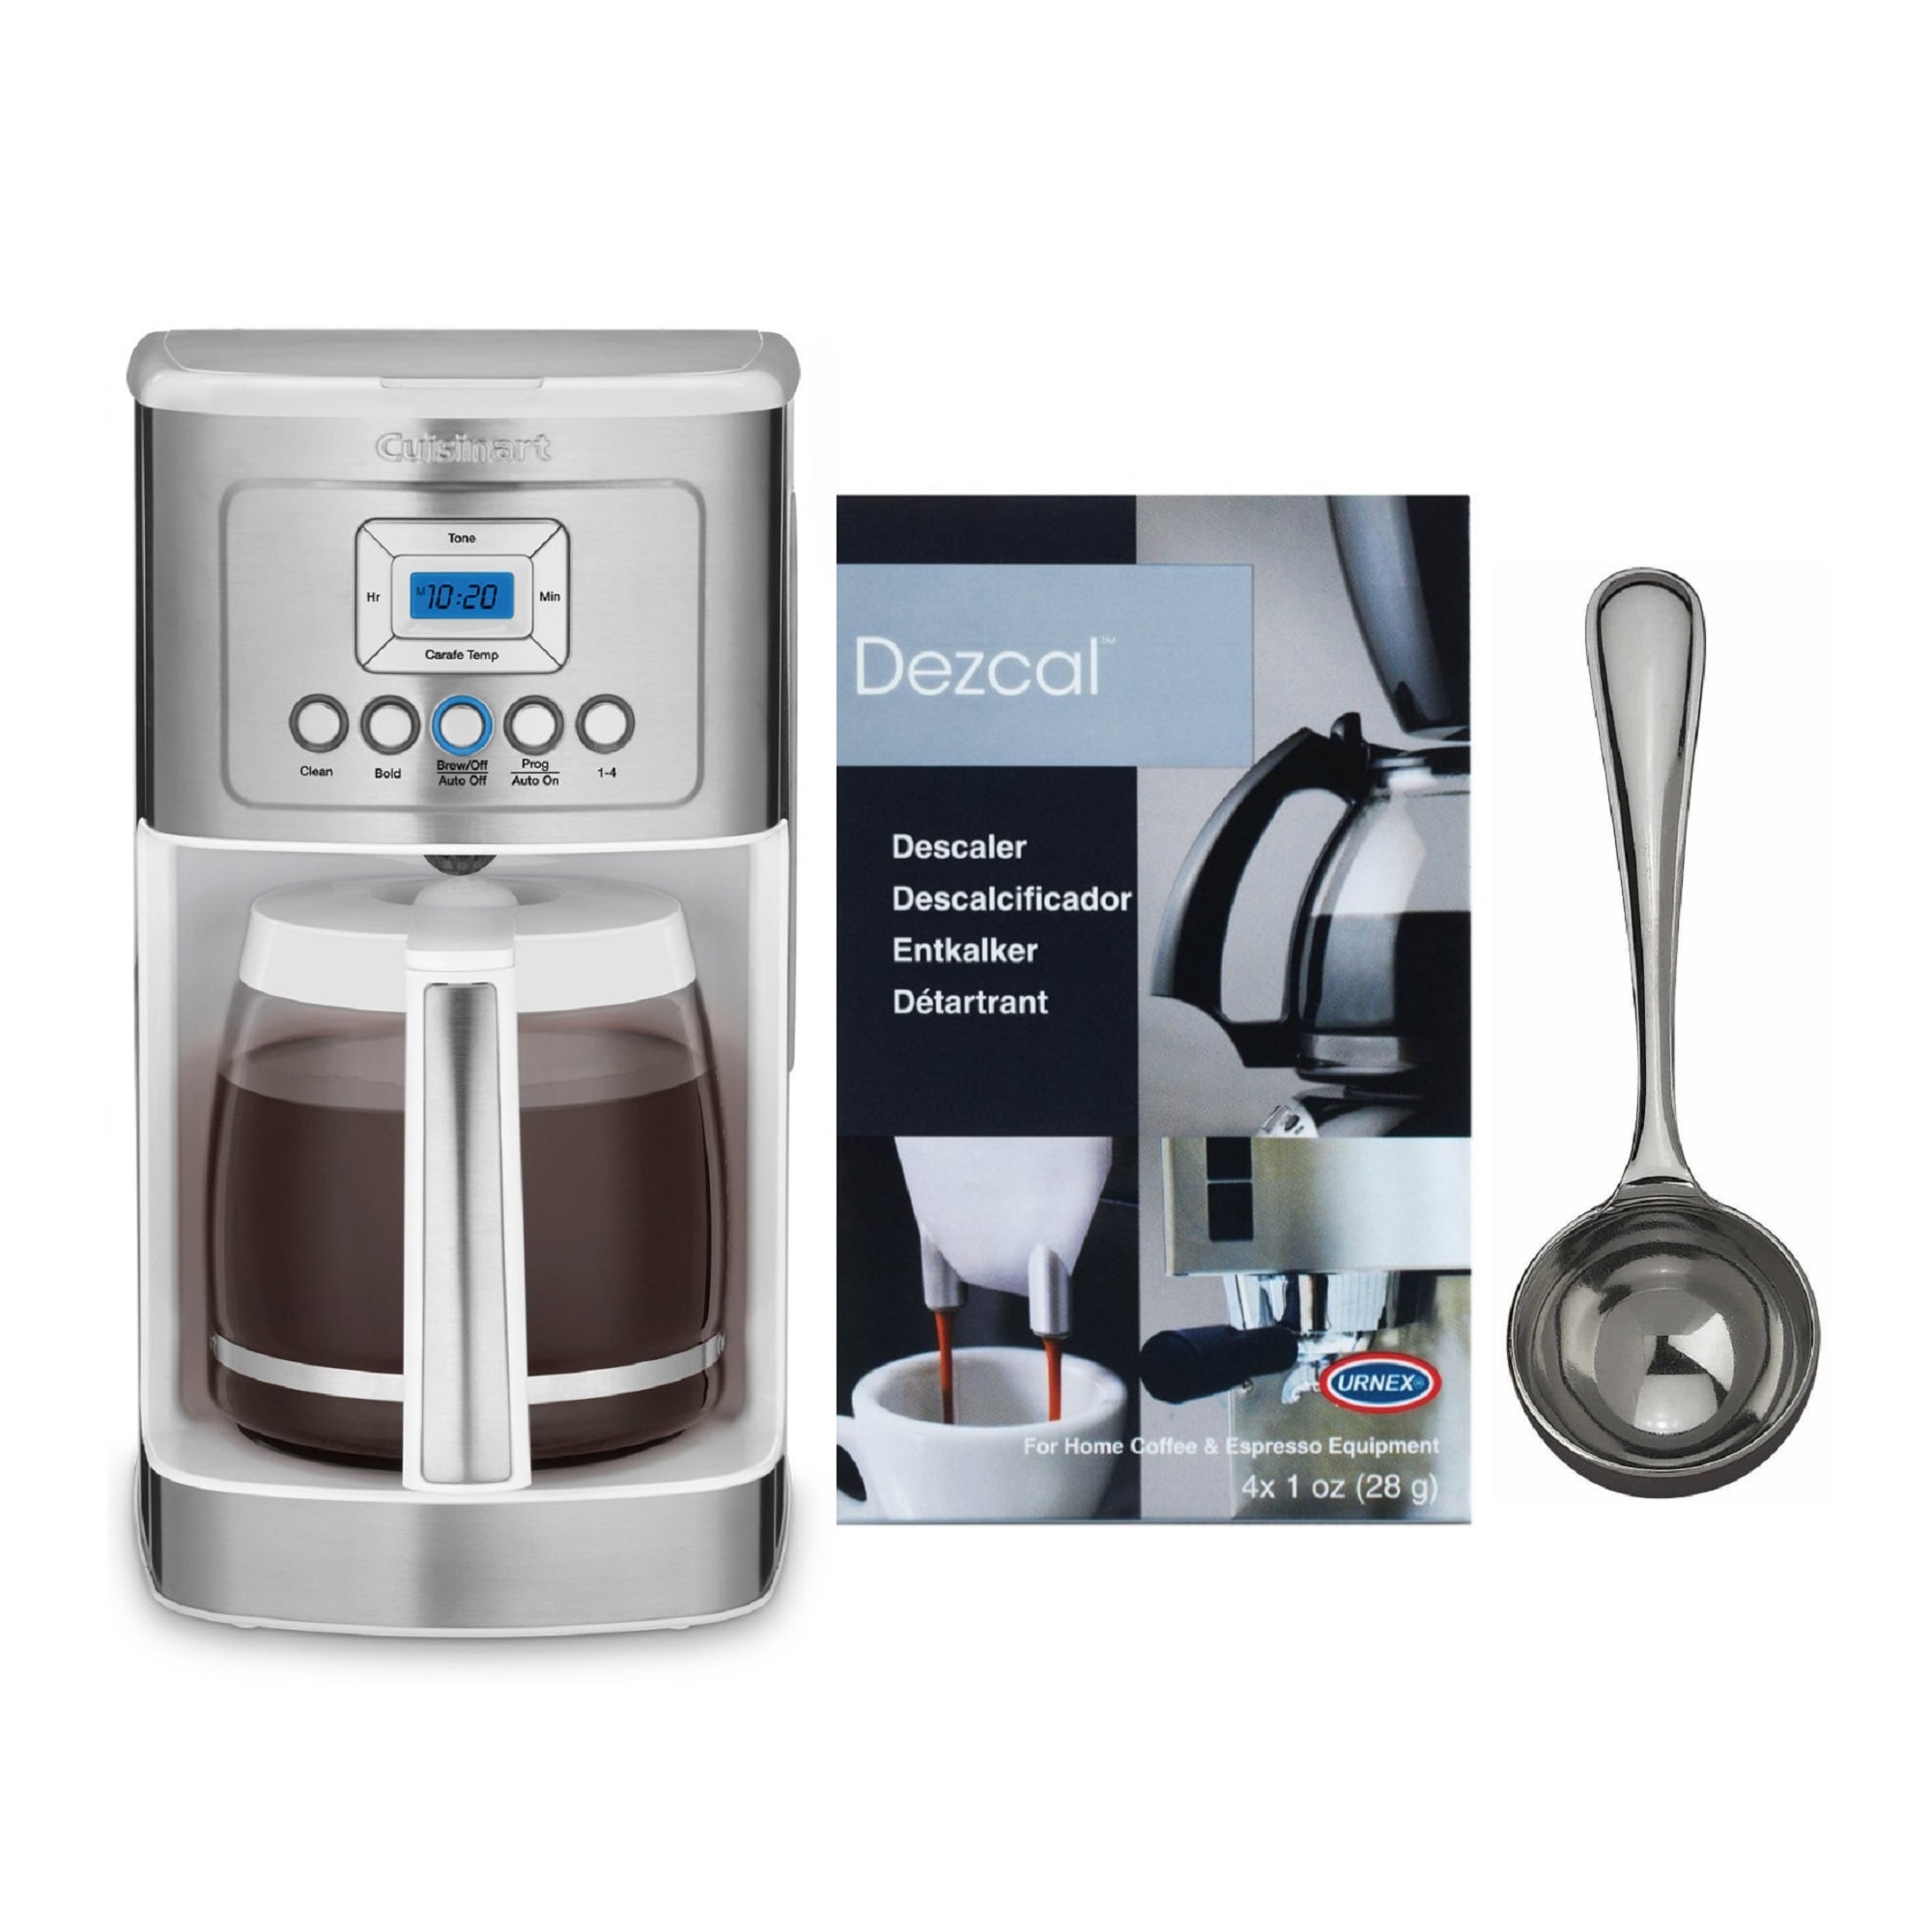 5-Cup Programmable Percolator & Electric Kettle, Cuisinart